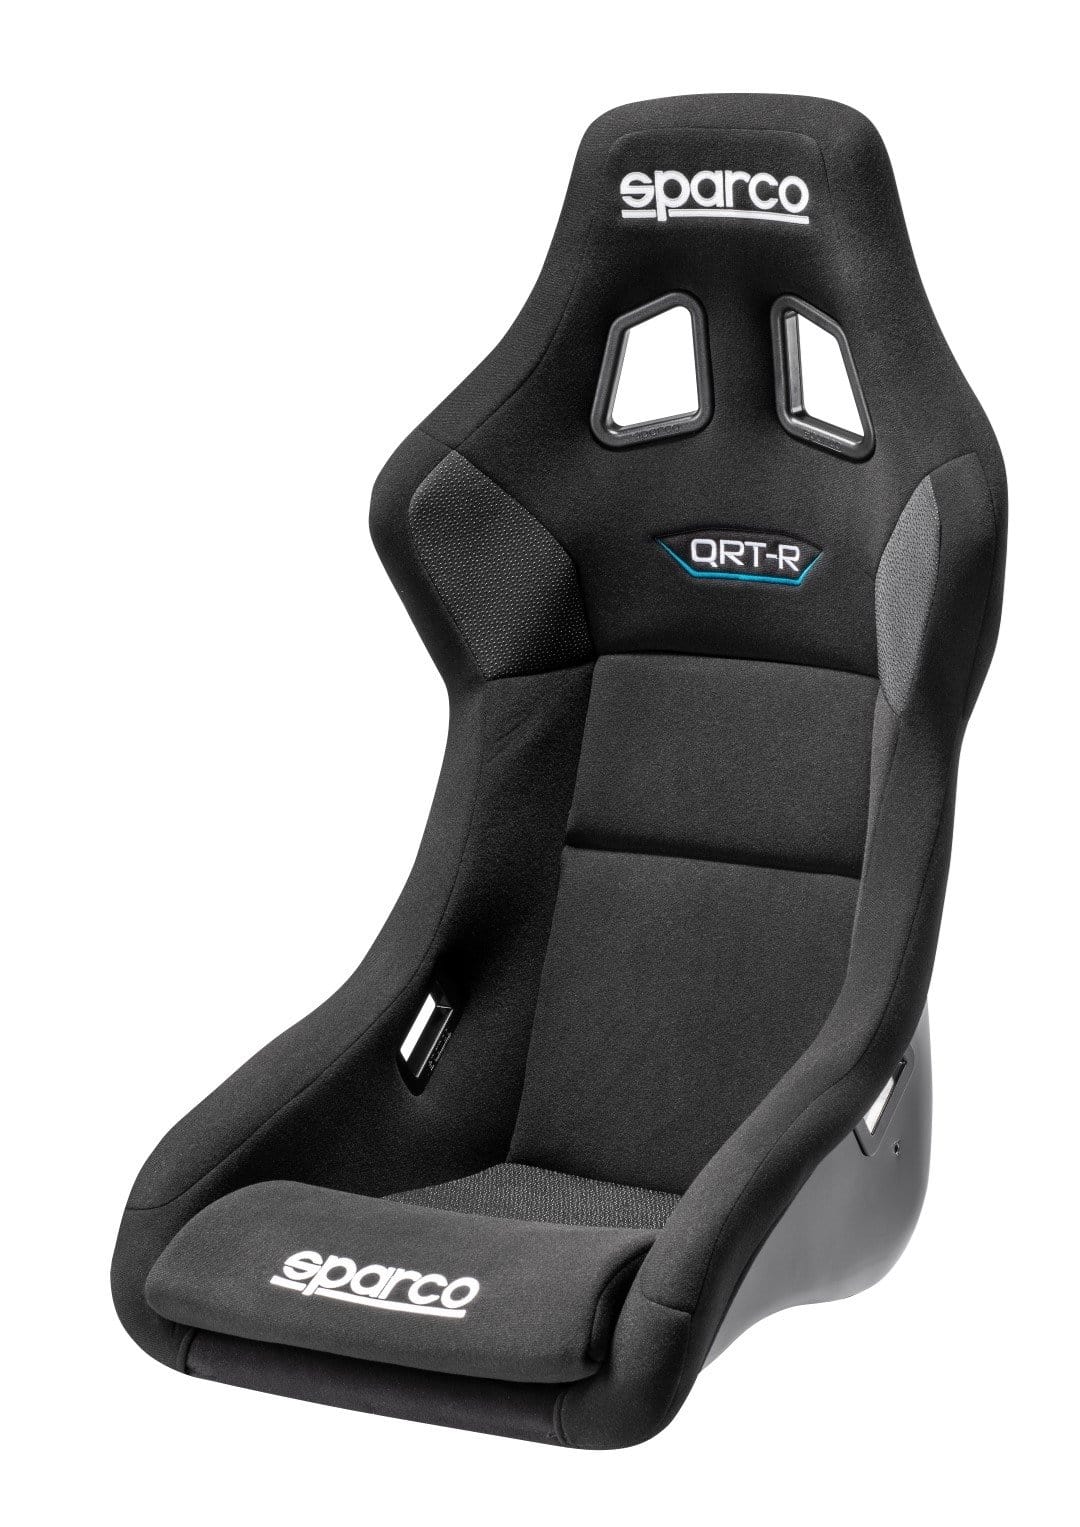 Sparco Seat QRT-R 2019 Black - Universal - Dirty Racing Products